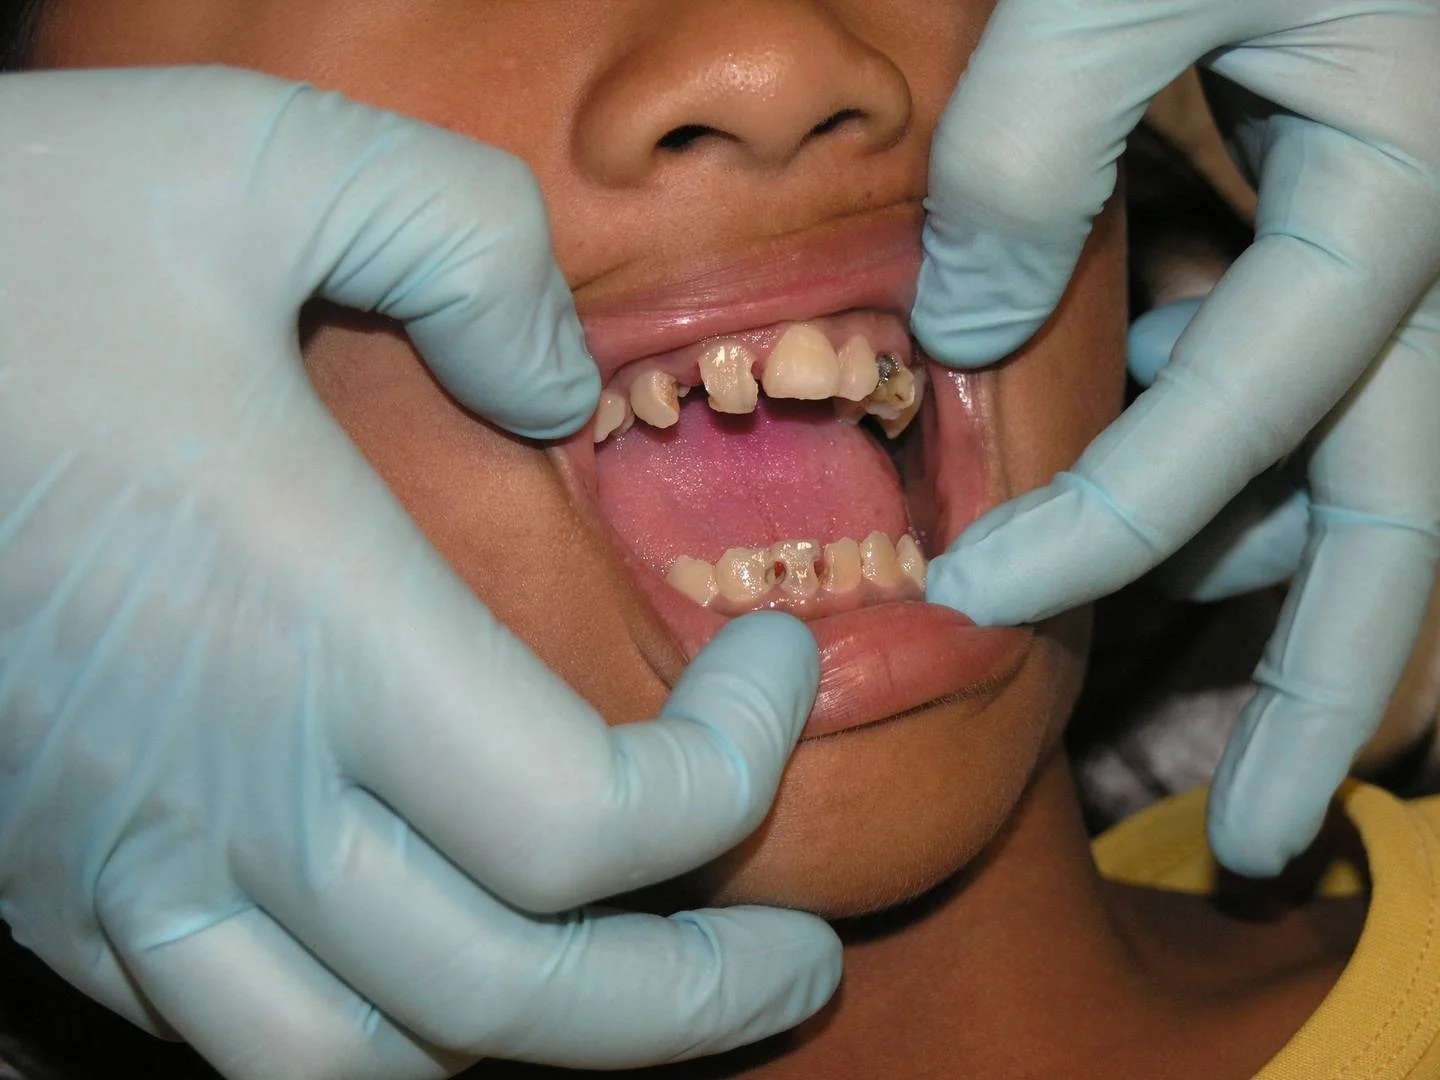 How to Prevent Common Dental Problems